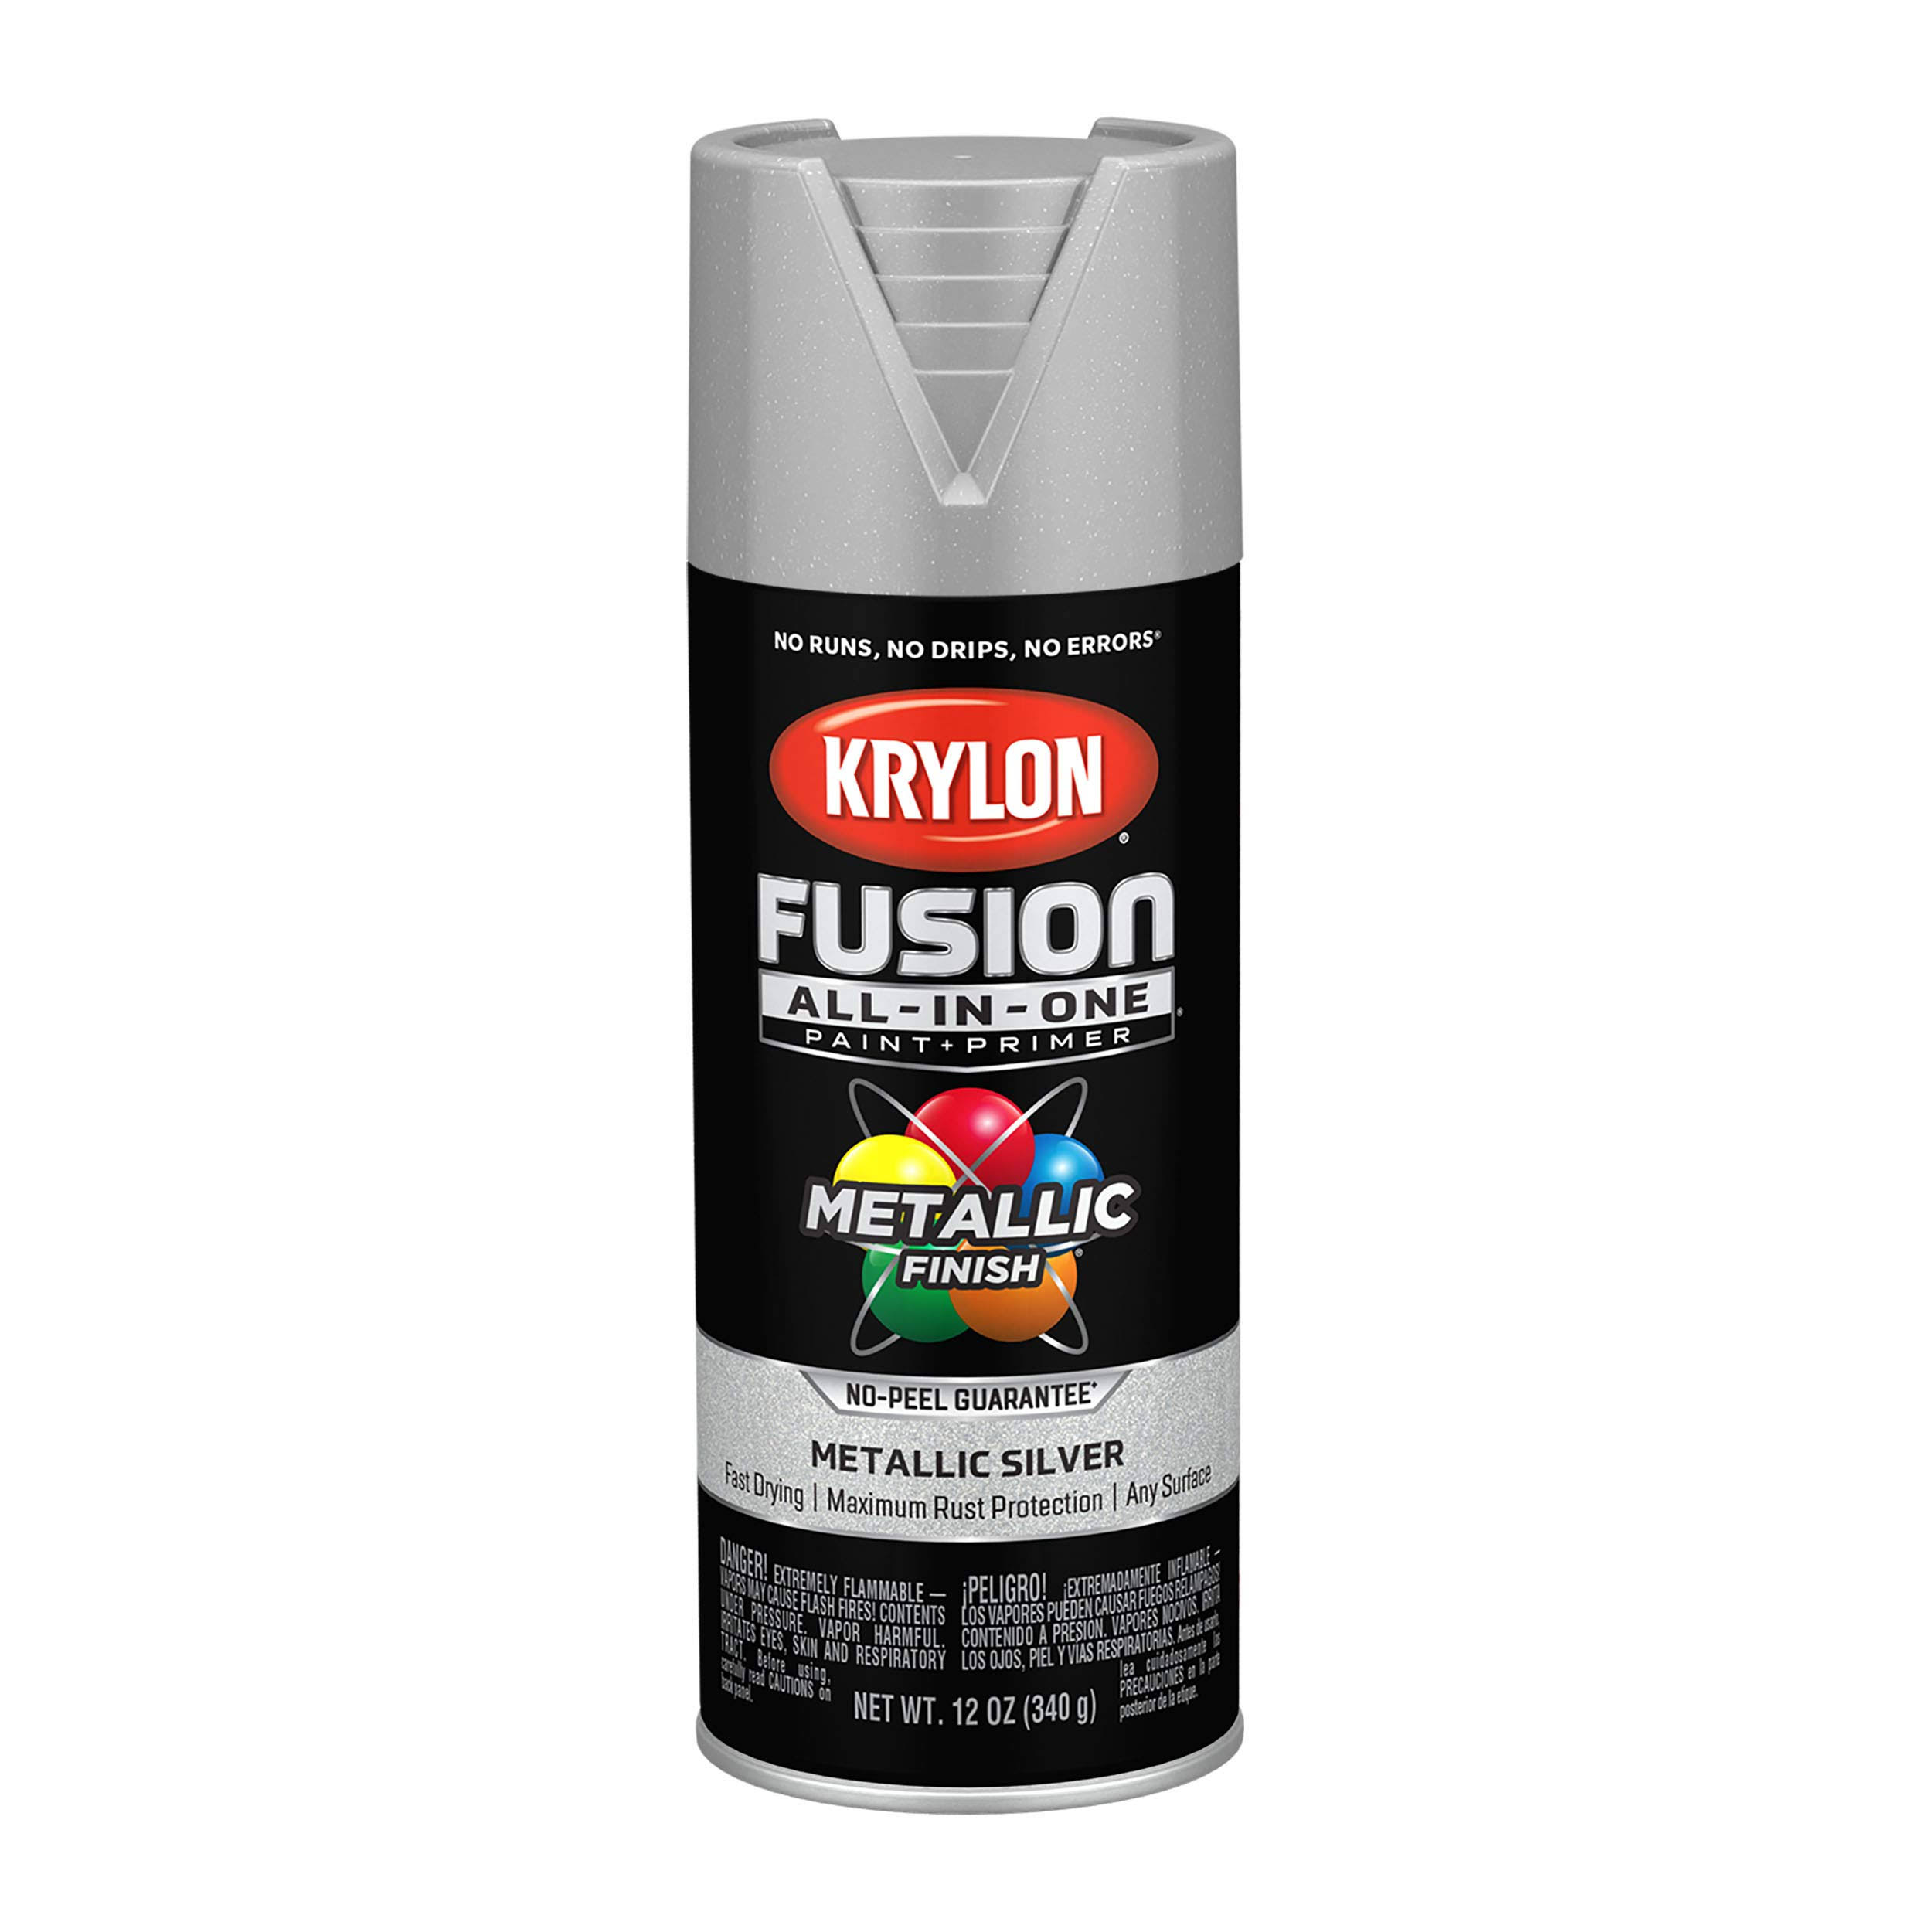 Krylon K02773007 Fusion All-In-One Spray Paint for Indoor/Outdoor Use, Metallic Silver